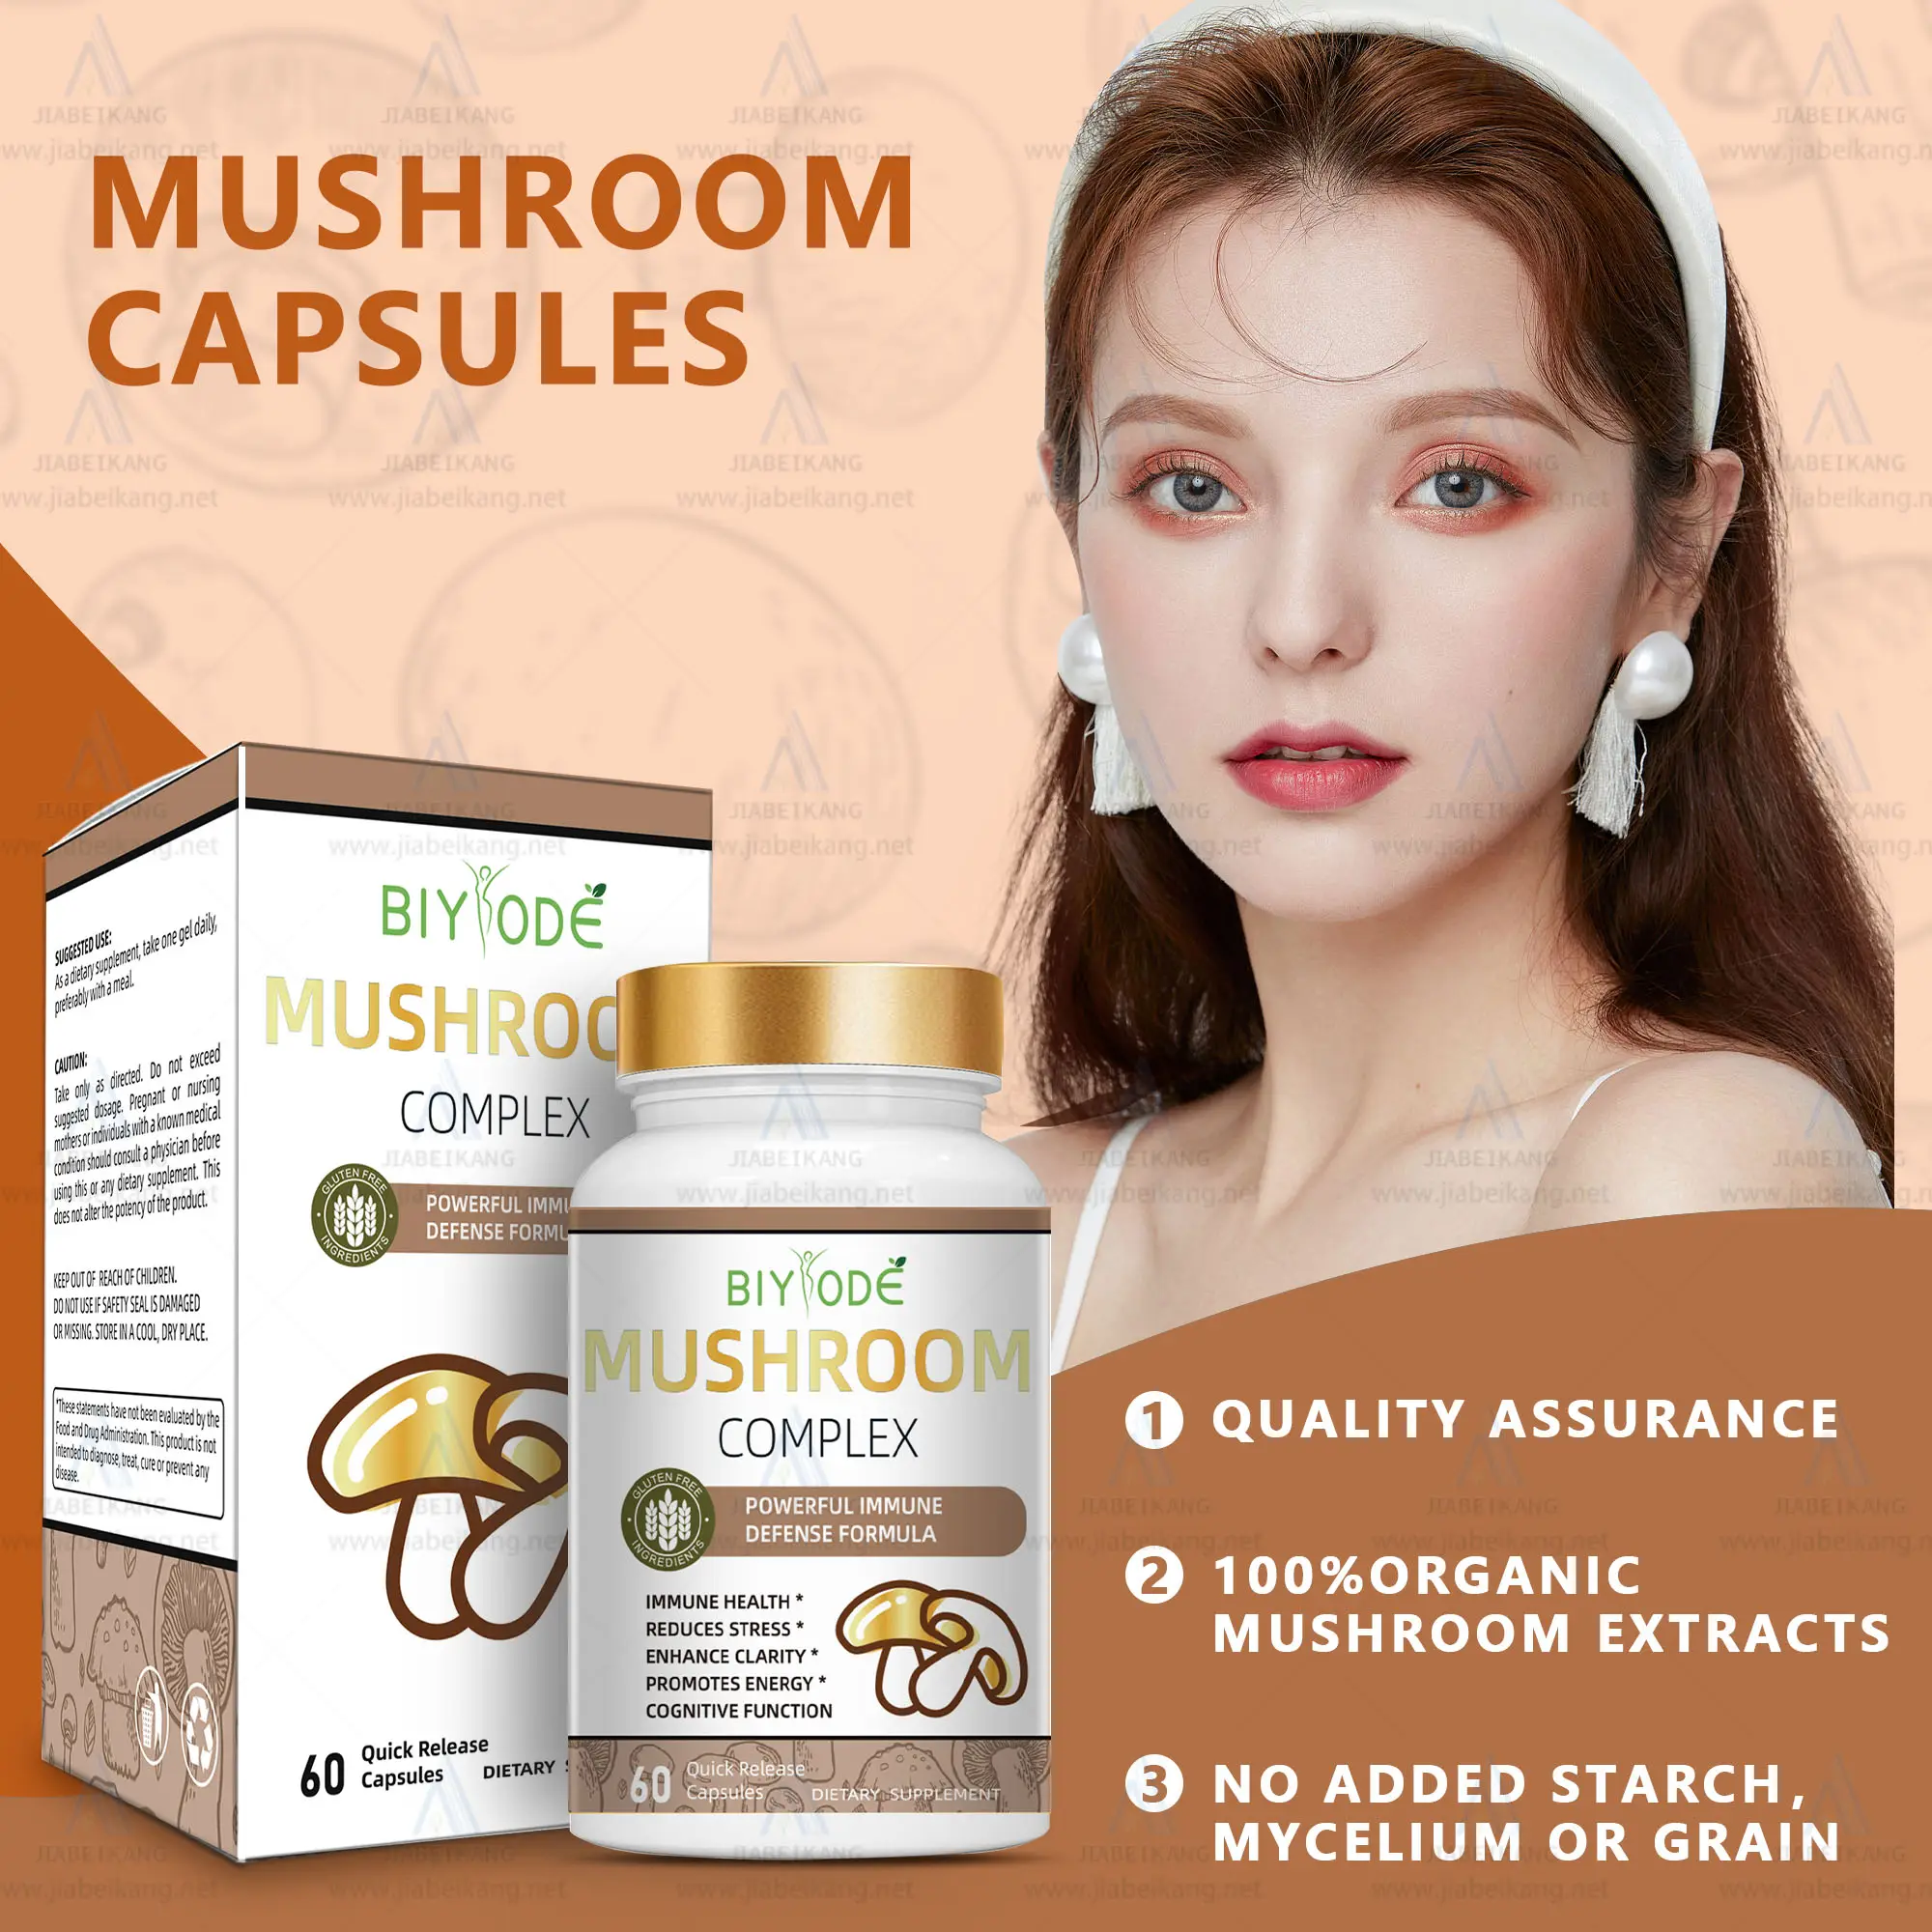 BIYODE mushroom extract functional chaga for alpha brain focus booster private label wholesale mushroom pill capsules